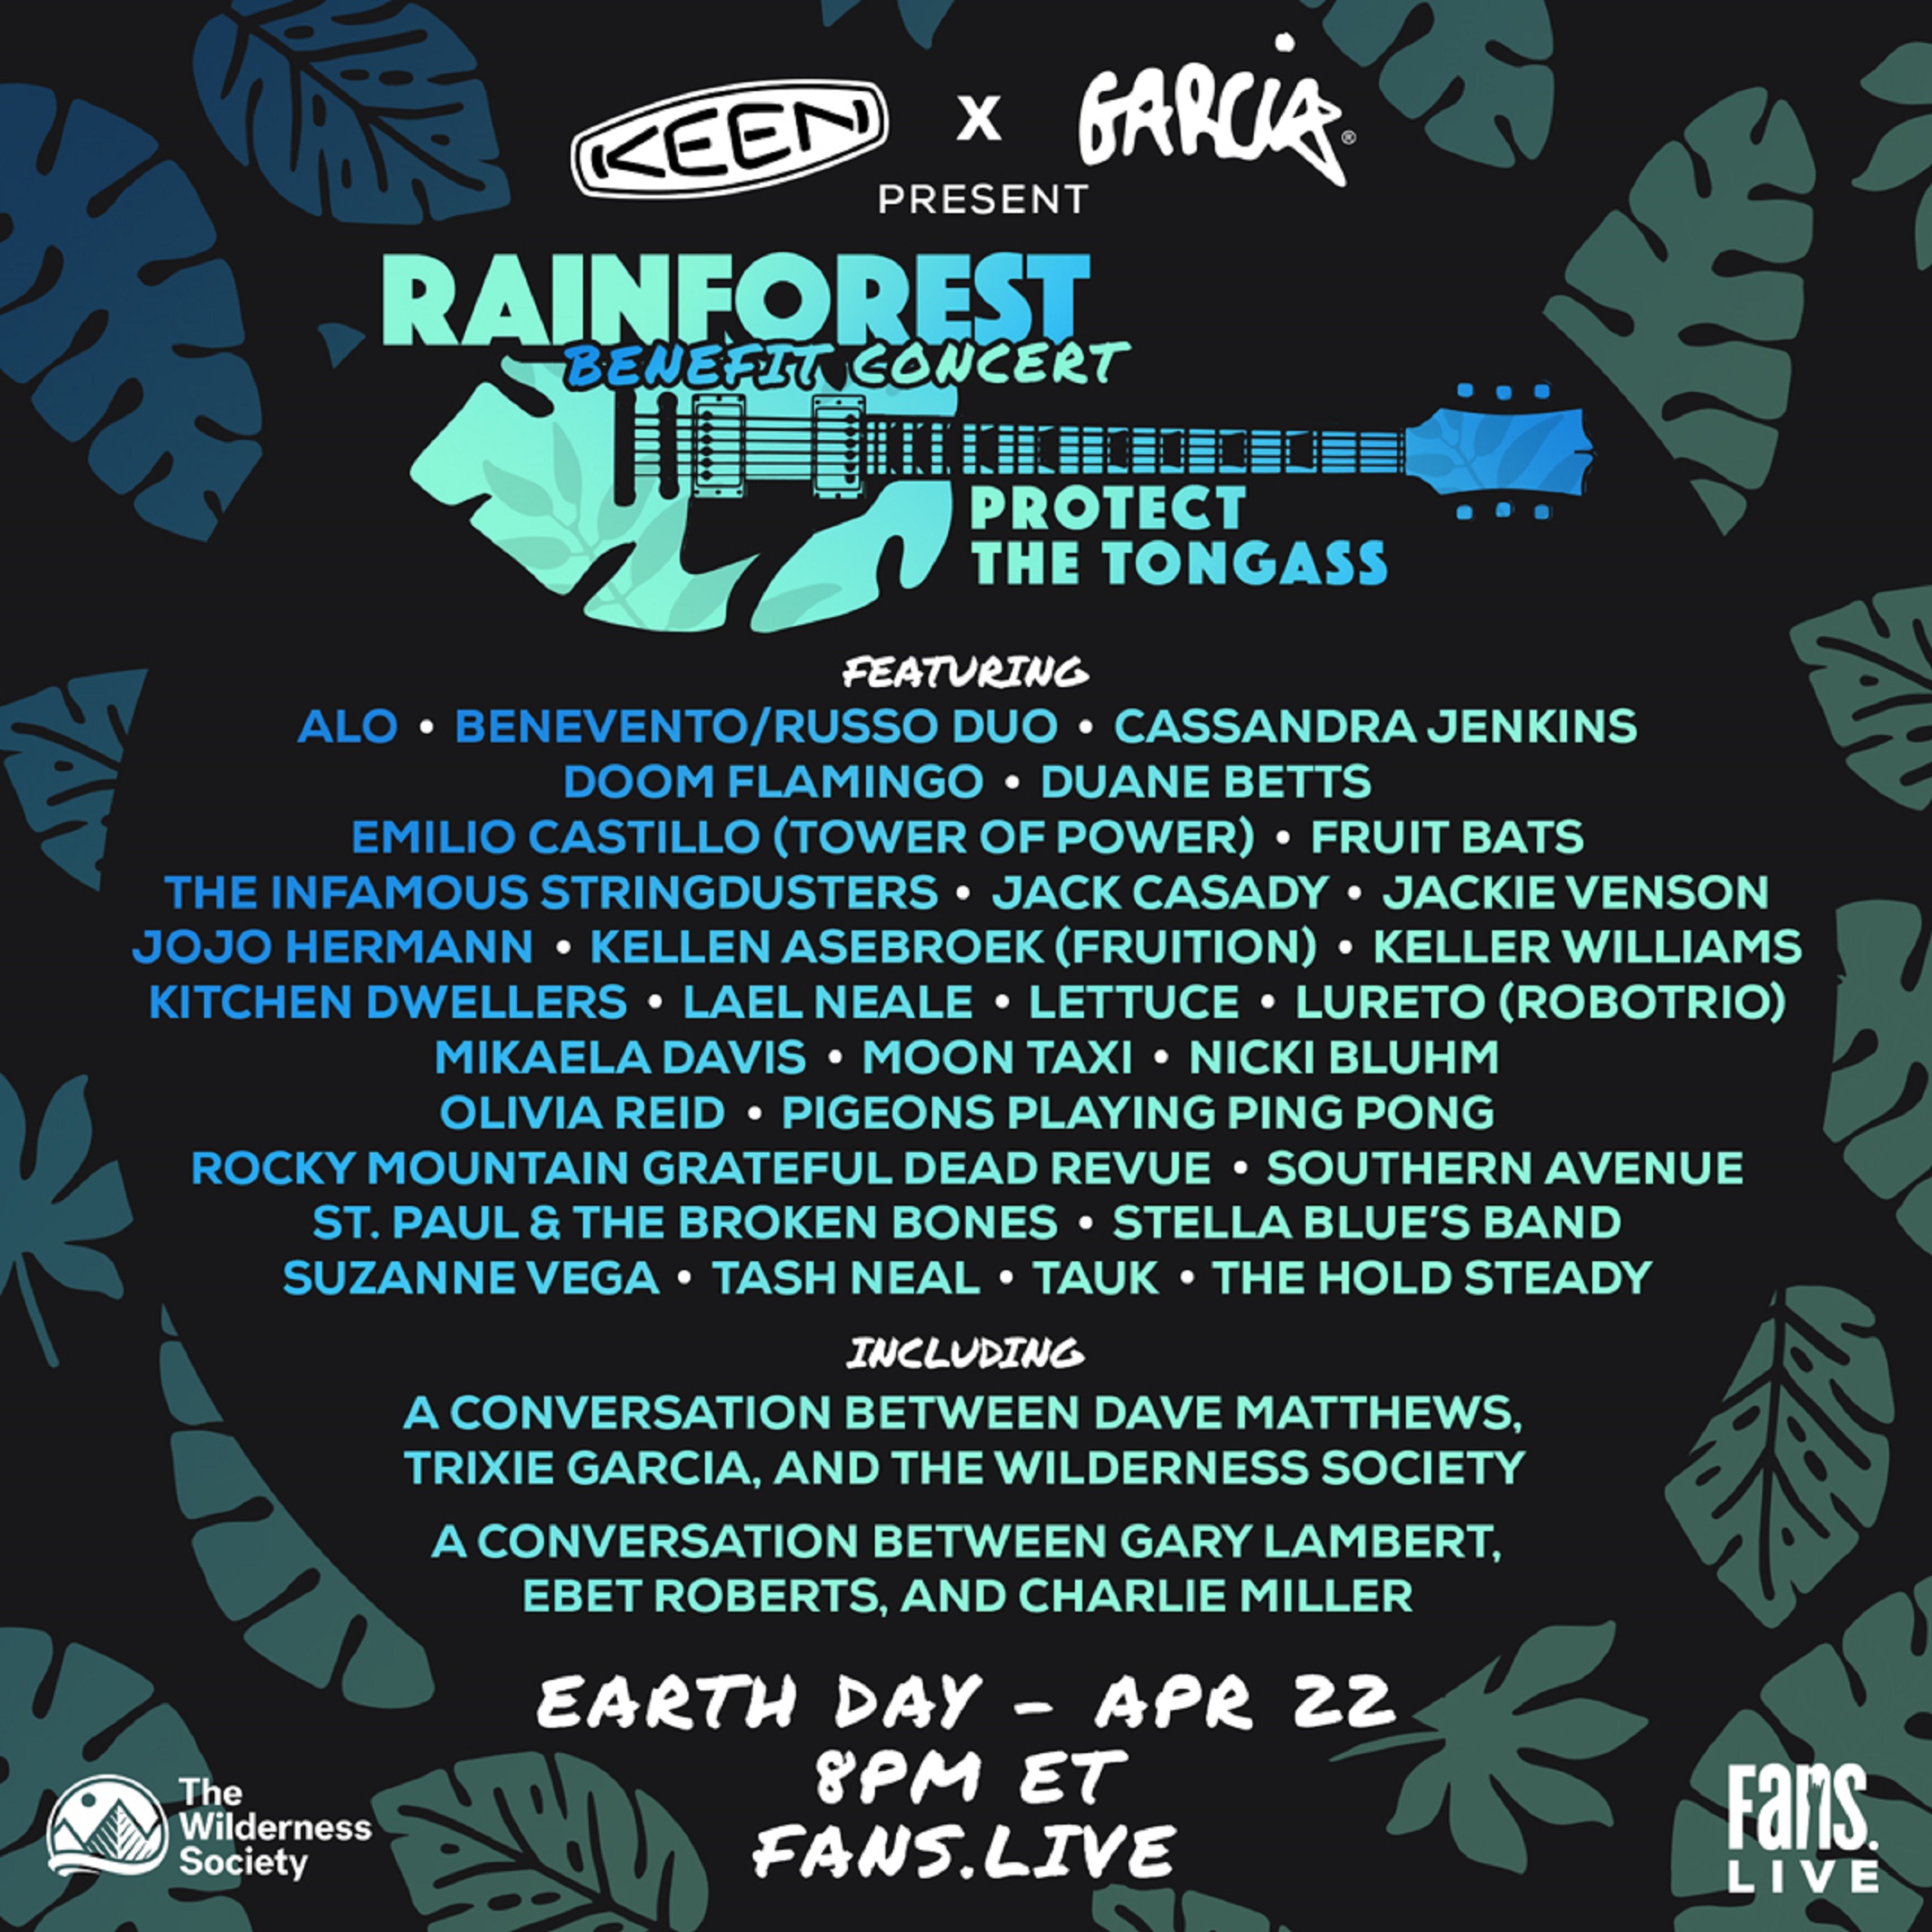 FANS and KEEN x Garcia Announce Full List of Artists and Conversations for Rainforest Benefit Concert: Protect the Tongass